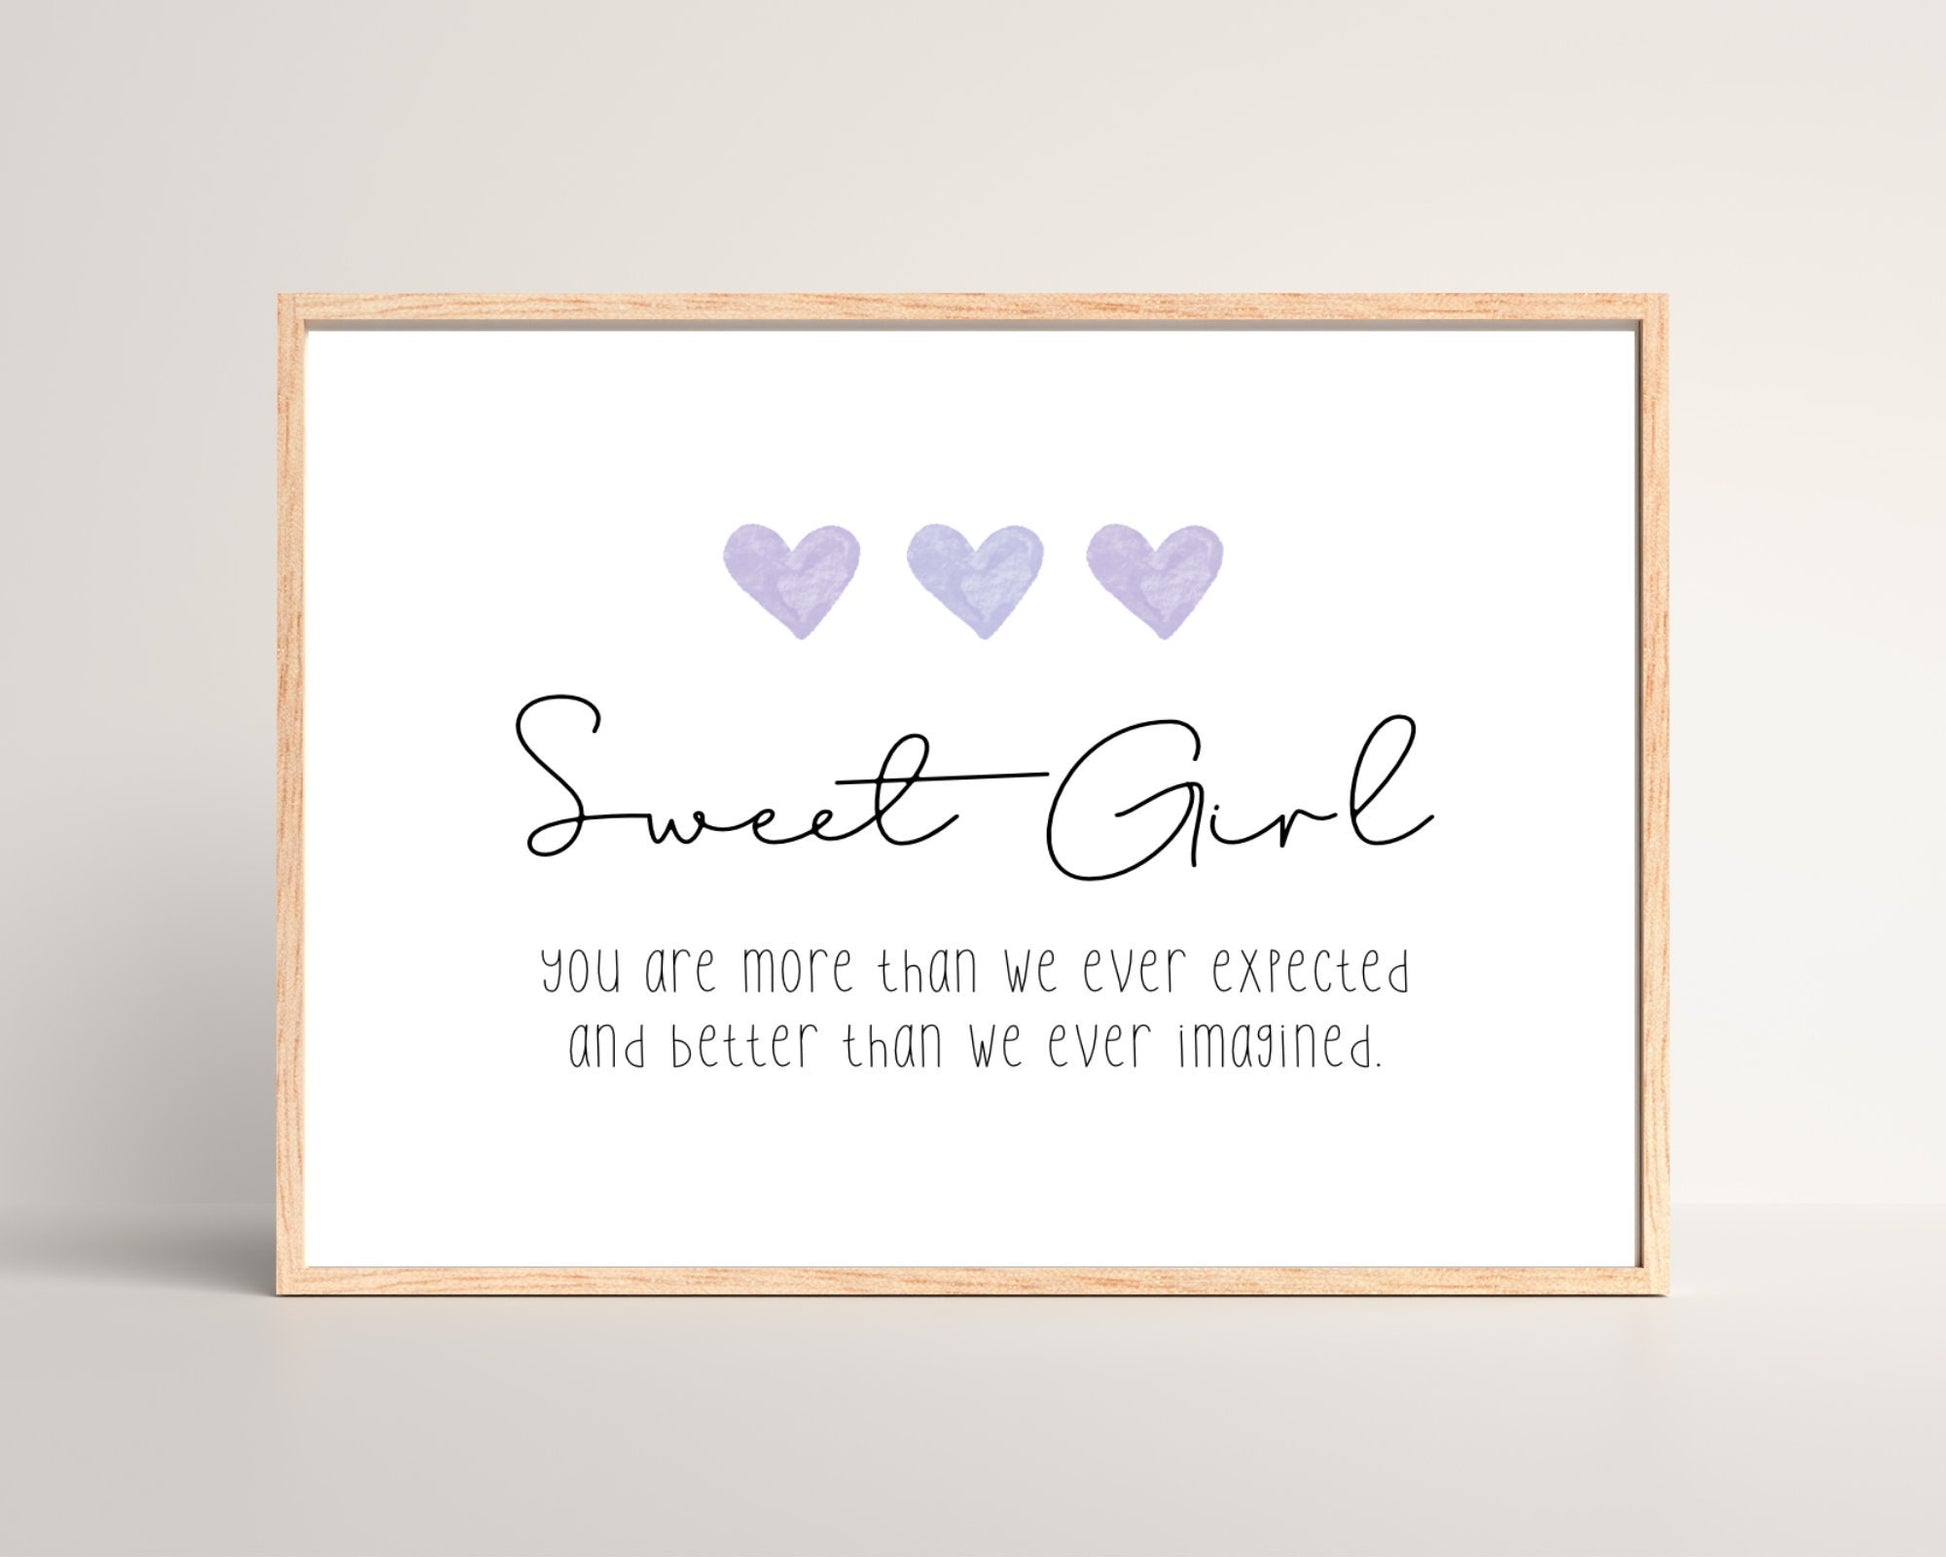 A little girl’s room digital print that has three purple hearts at the top, and a piece of writing that says: “Sweet girl, you are more than we ever expected and better than we ever imagined.”